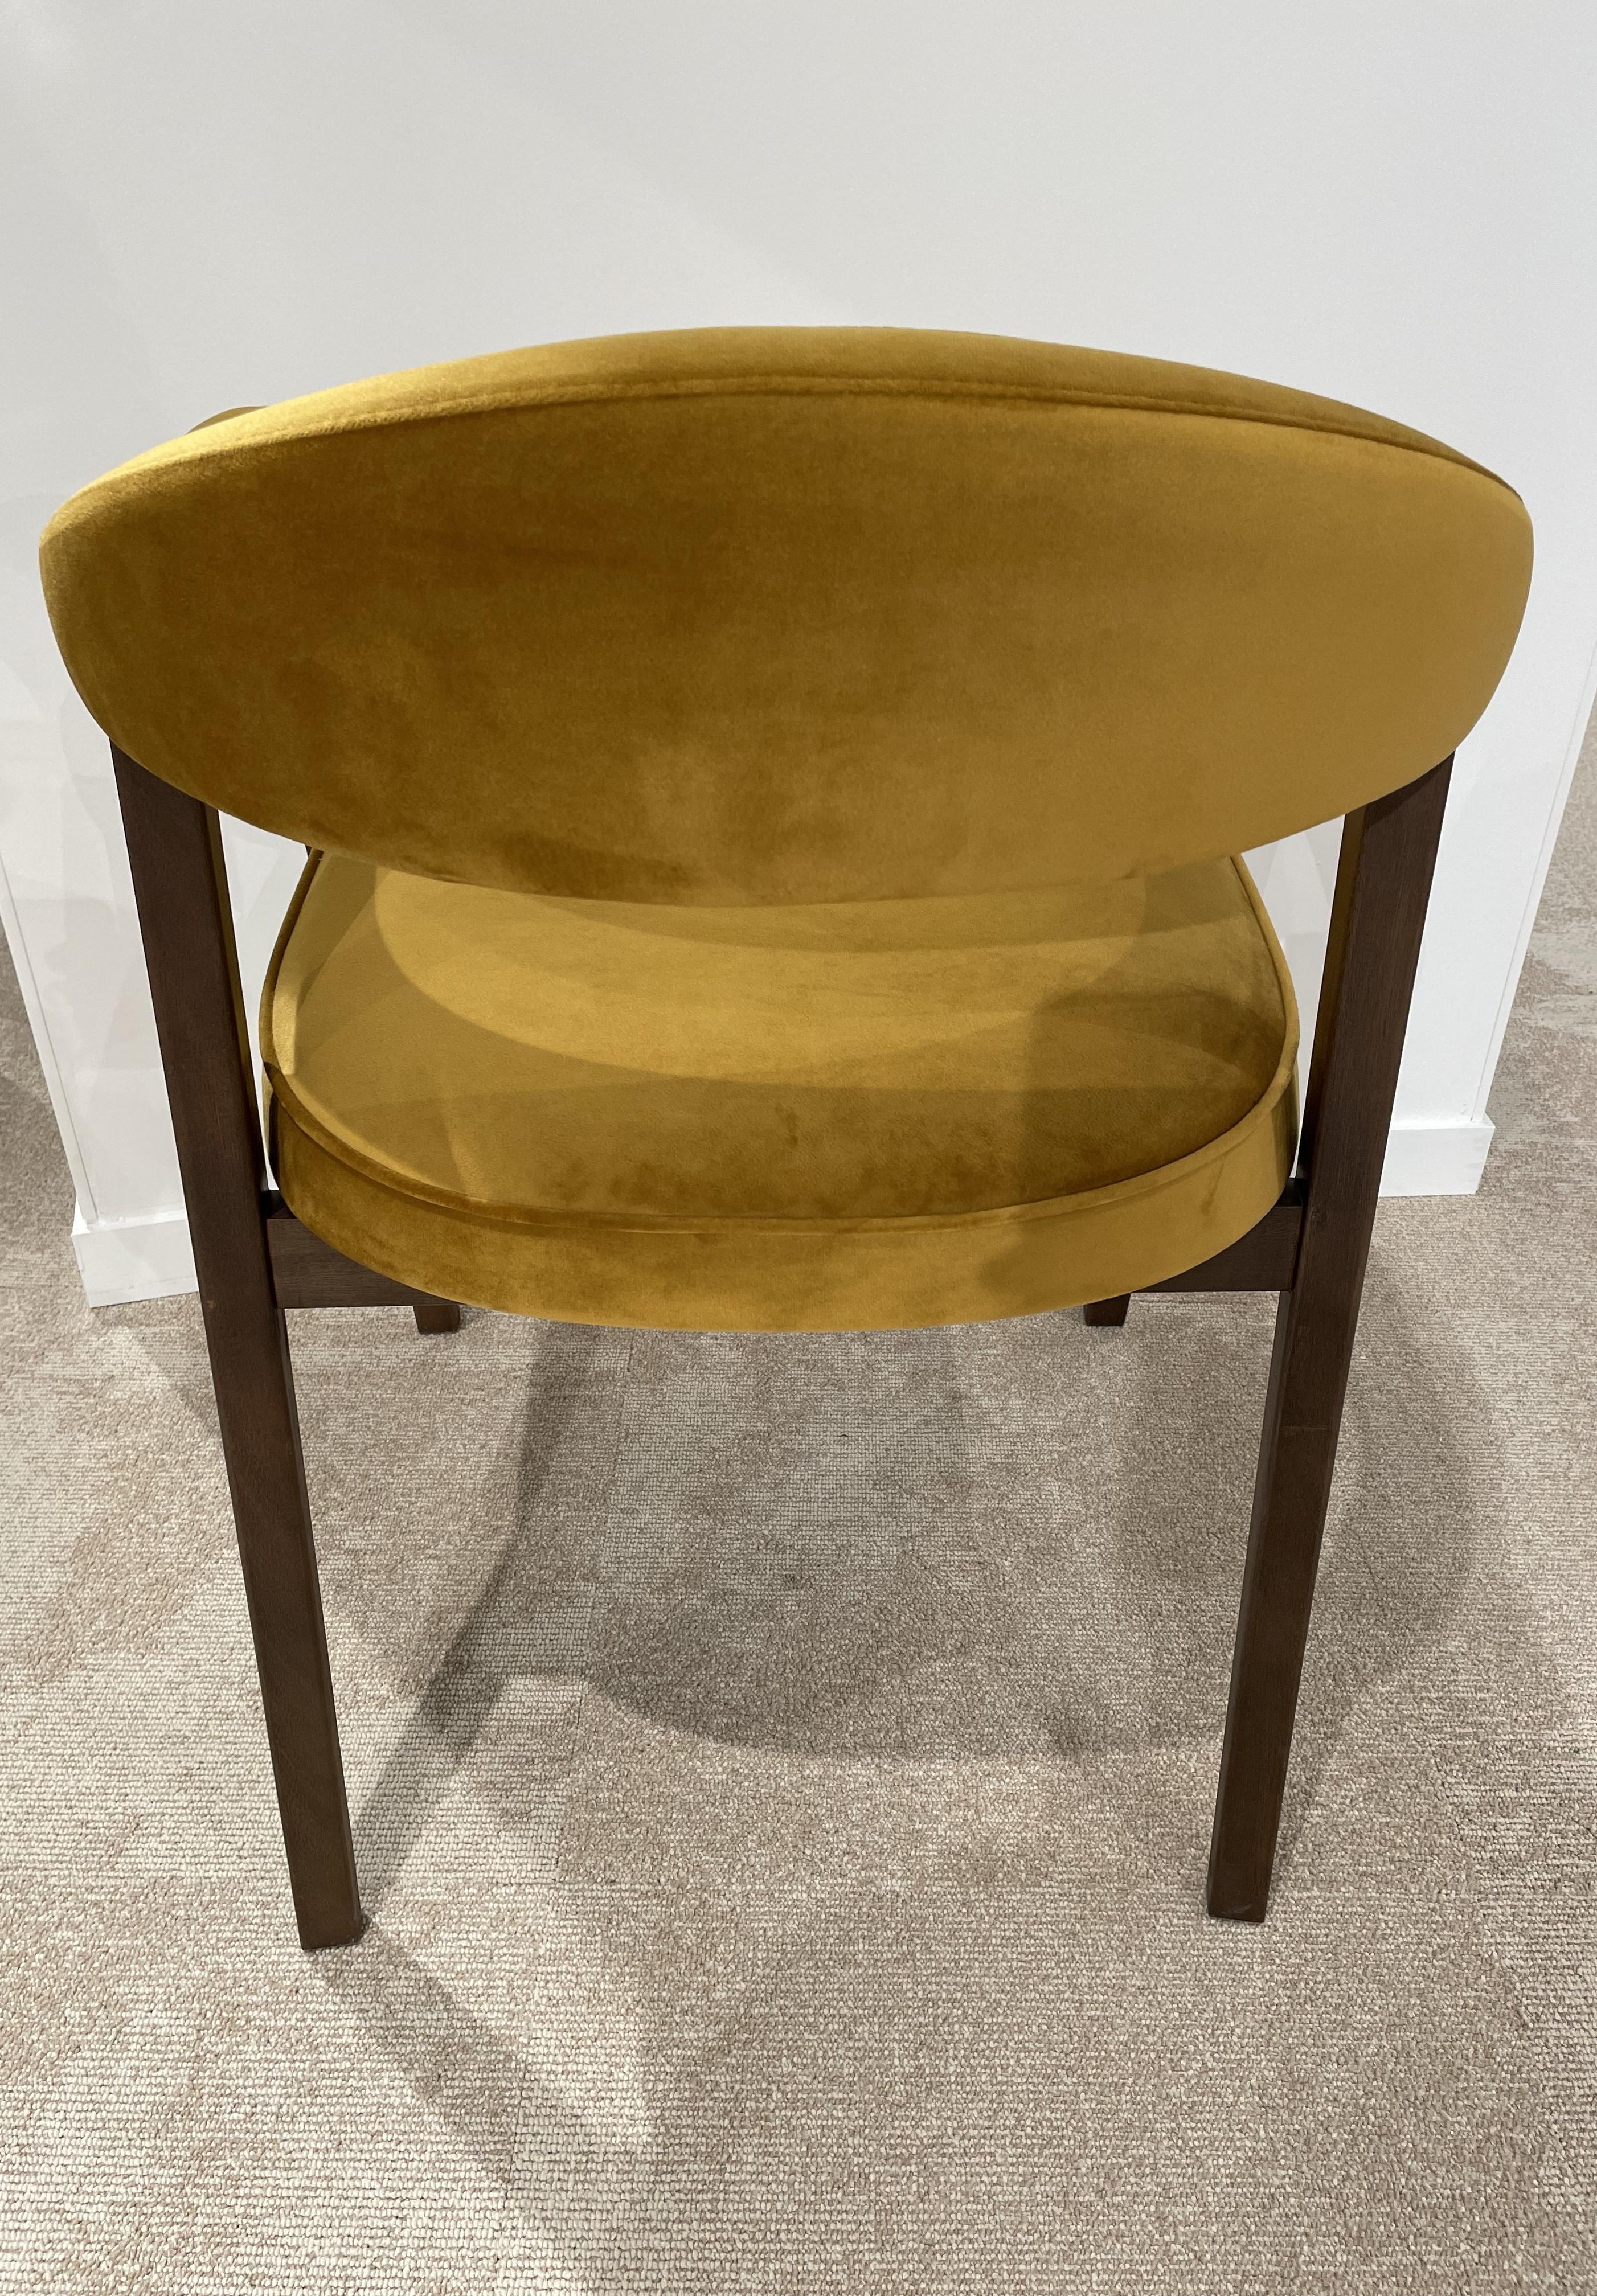 Contemporary 1960s Danish Design and Scandinavian Style Wooden and Velvet Fabric Chair For Sale